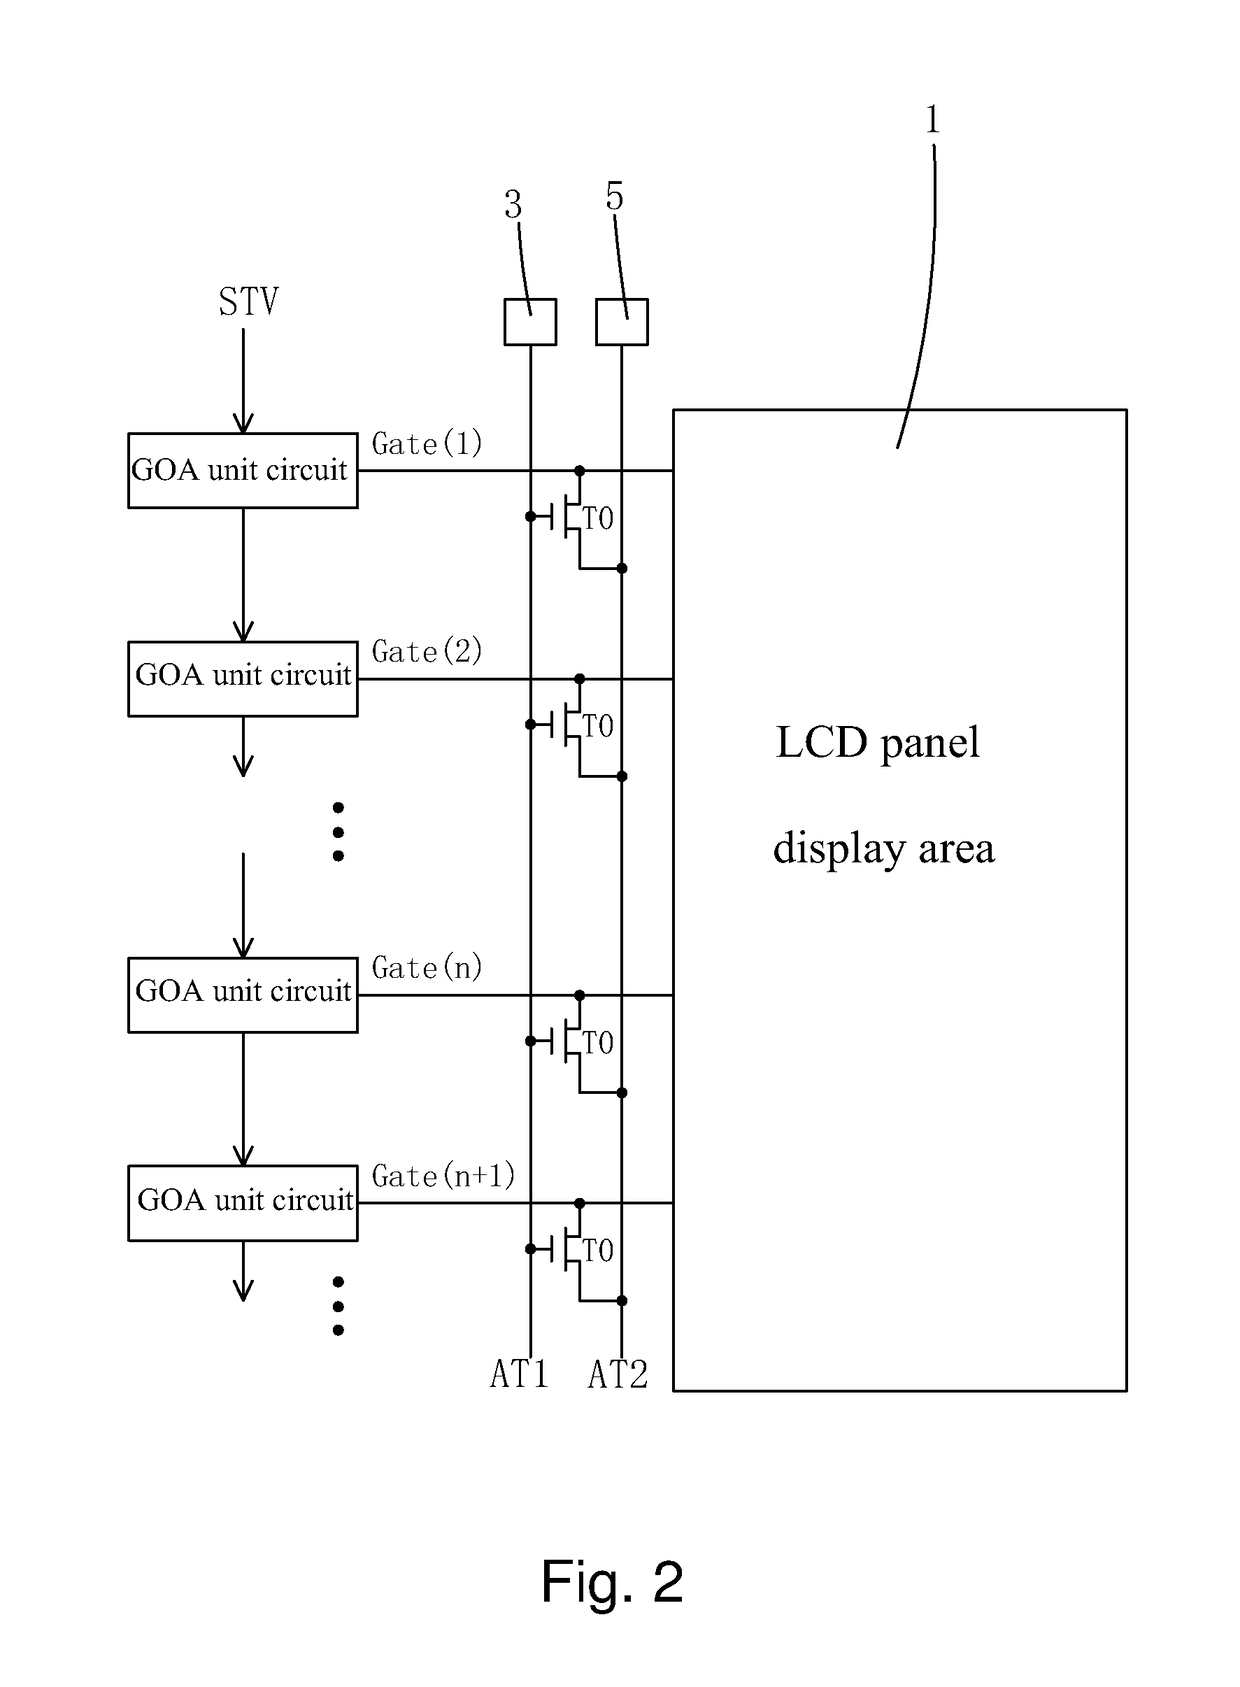 Common circuit for goa test and eliminating power-off residual images